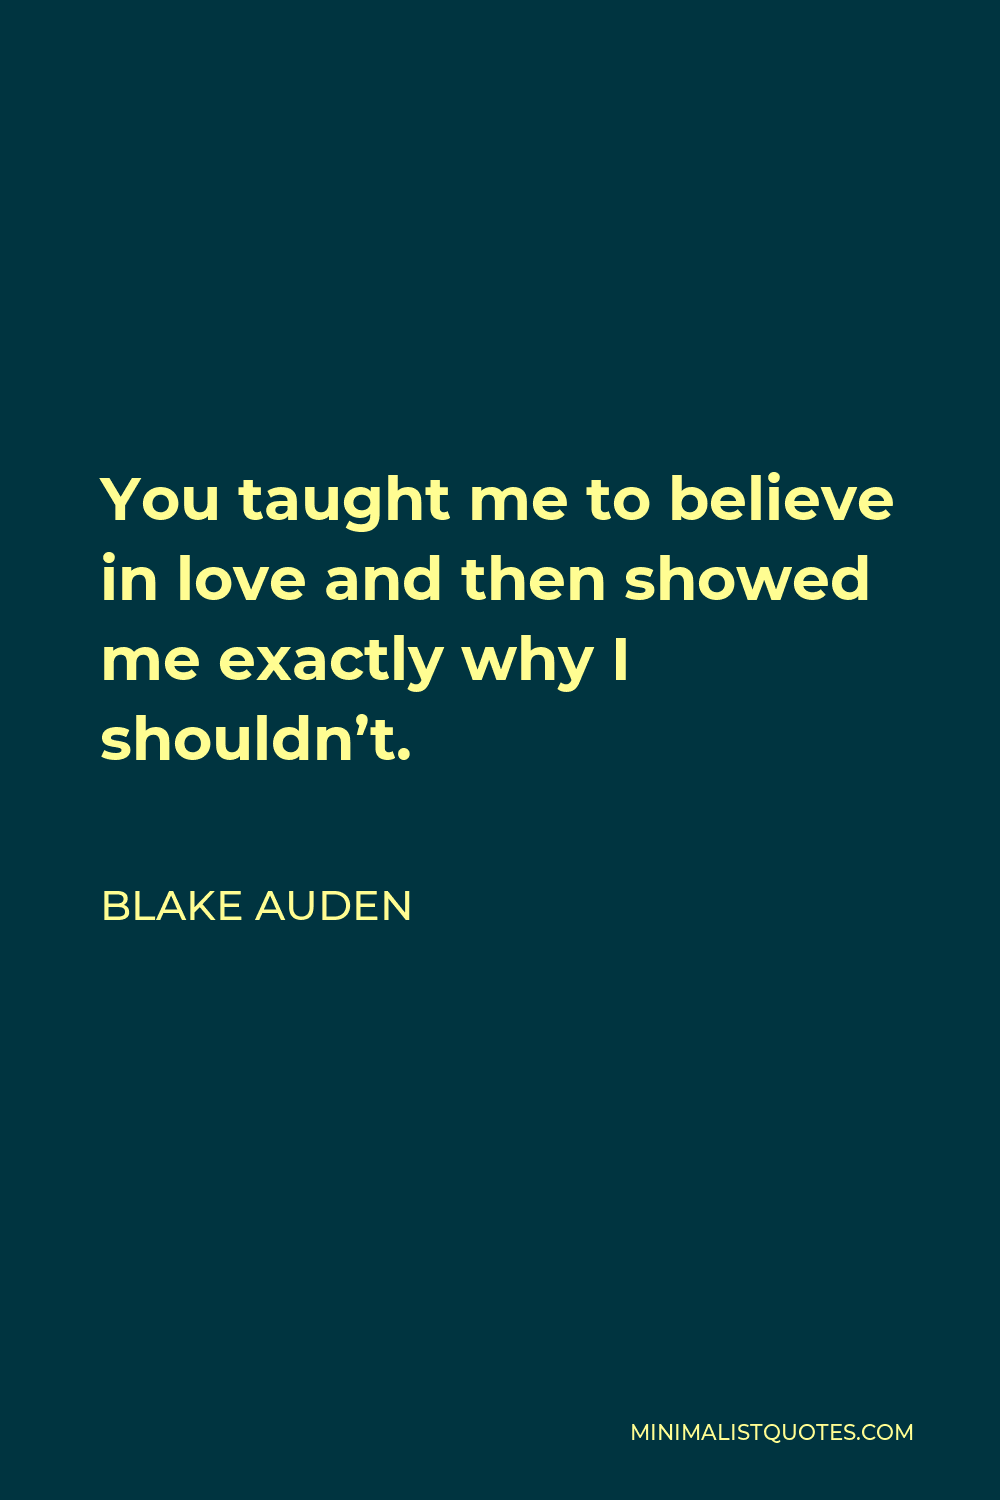 Blake Auden Quote - You taught me to believe in love and then showed me exactly why I shouldn’t.